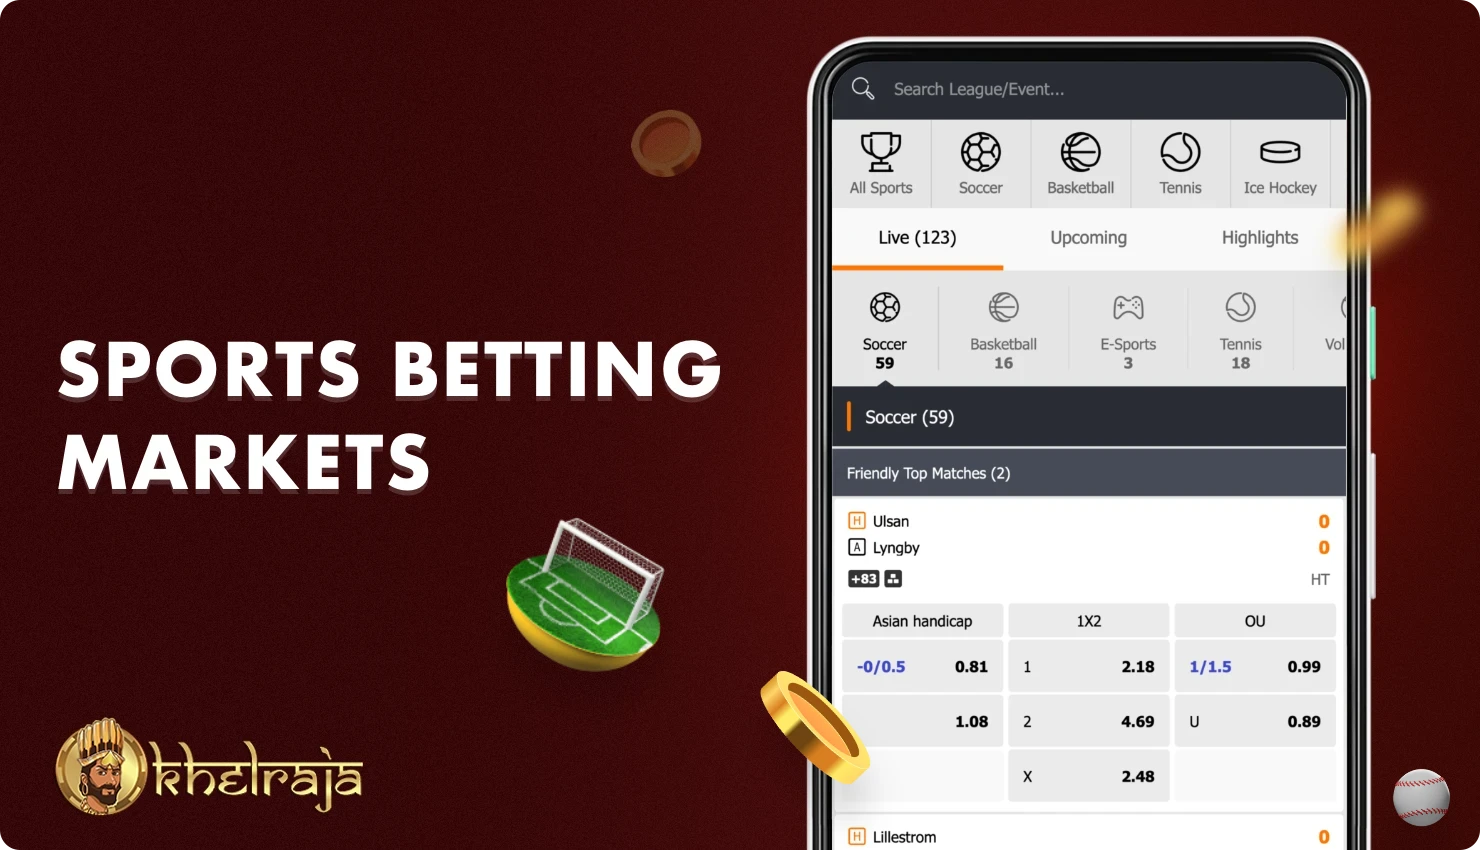 The Khelraja app offers Indian users a variety of betting options on dozens of sports, including esports